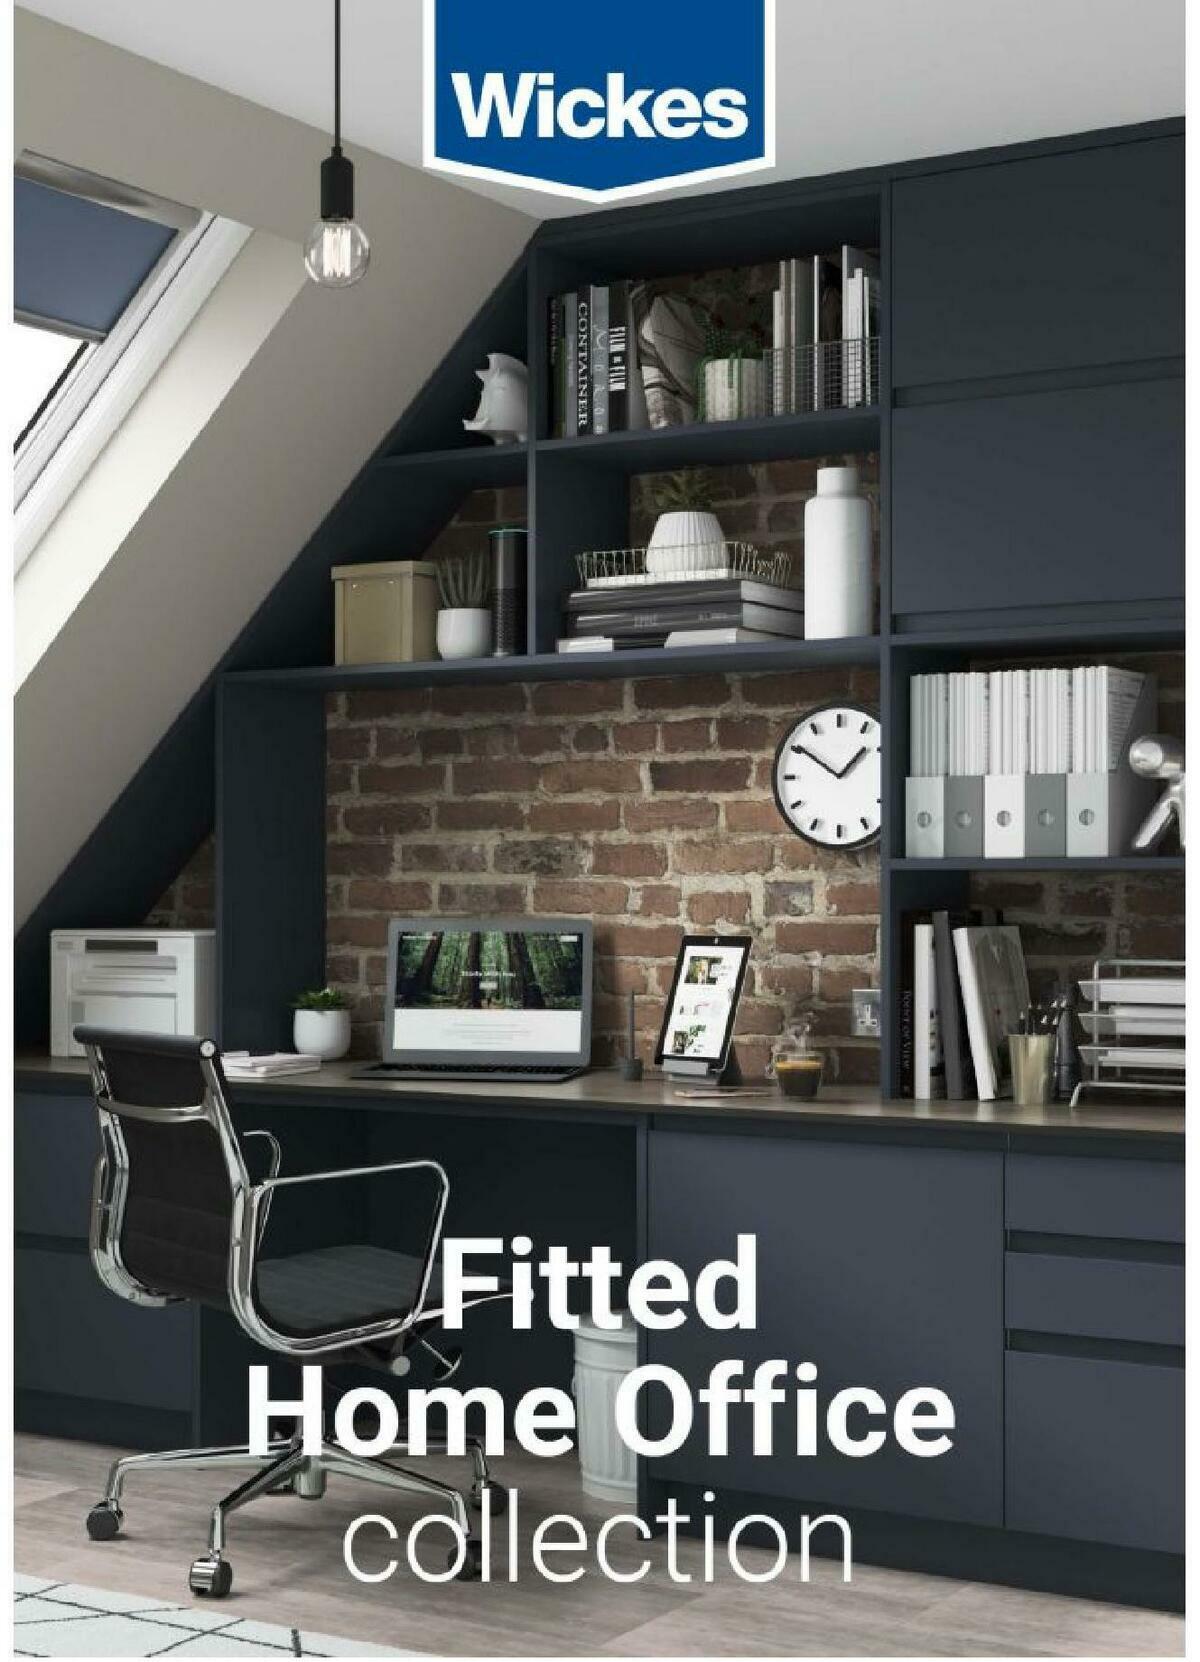 Wickes Fitted Home Office Offers from 1 March